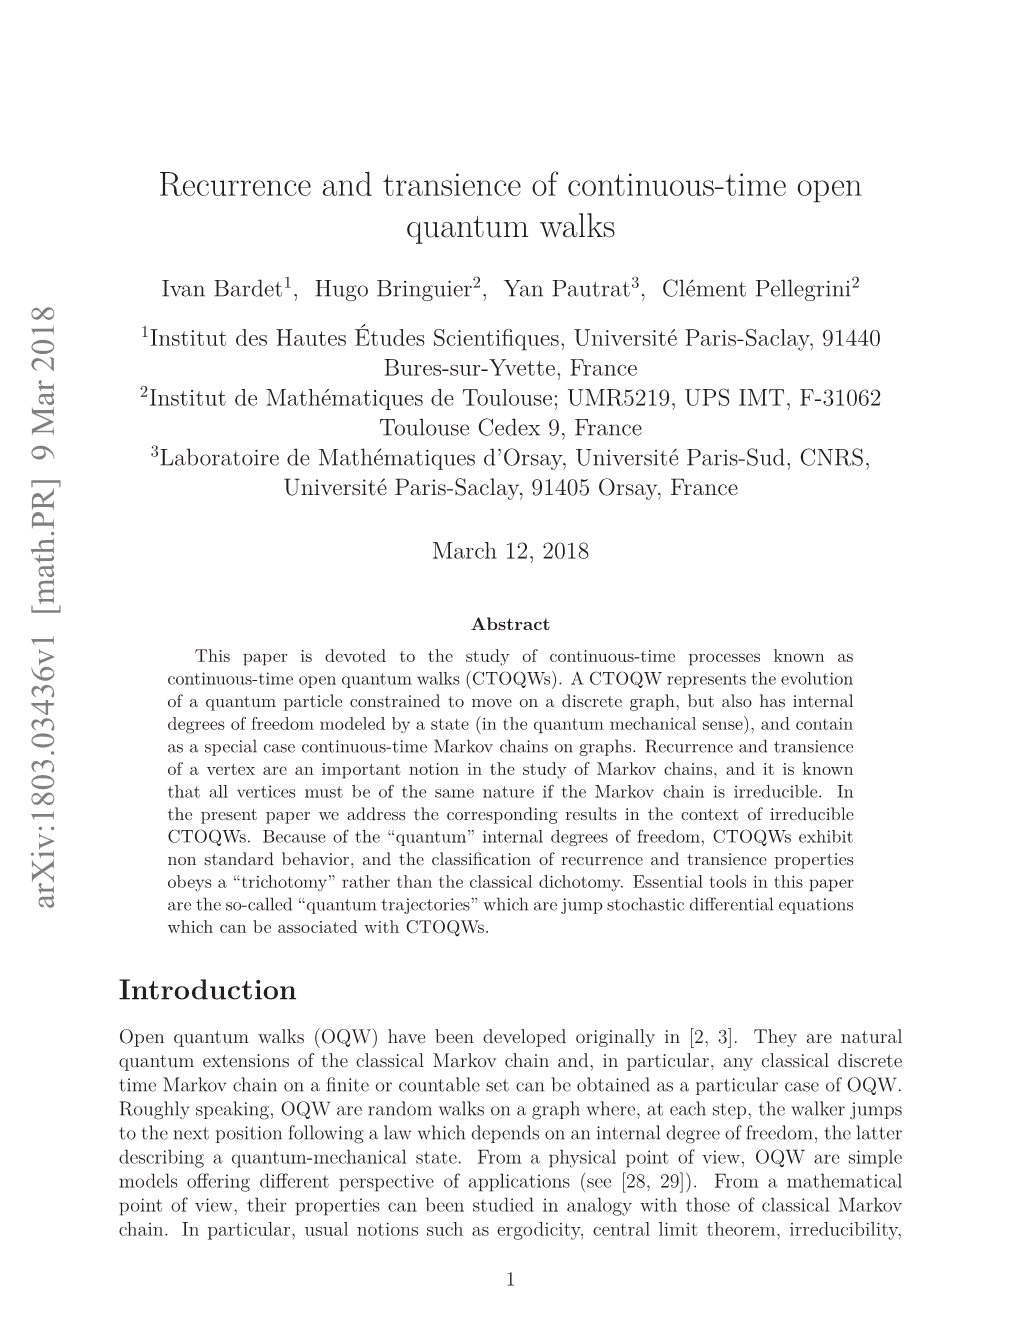 Recurrence and Transience of Continuous-Time Open Quantum Walks